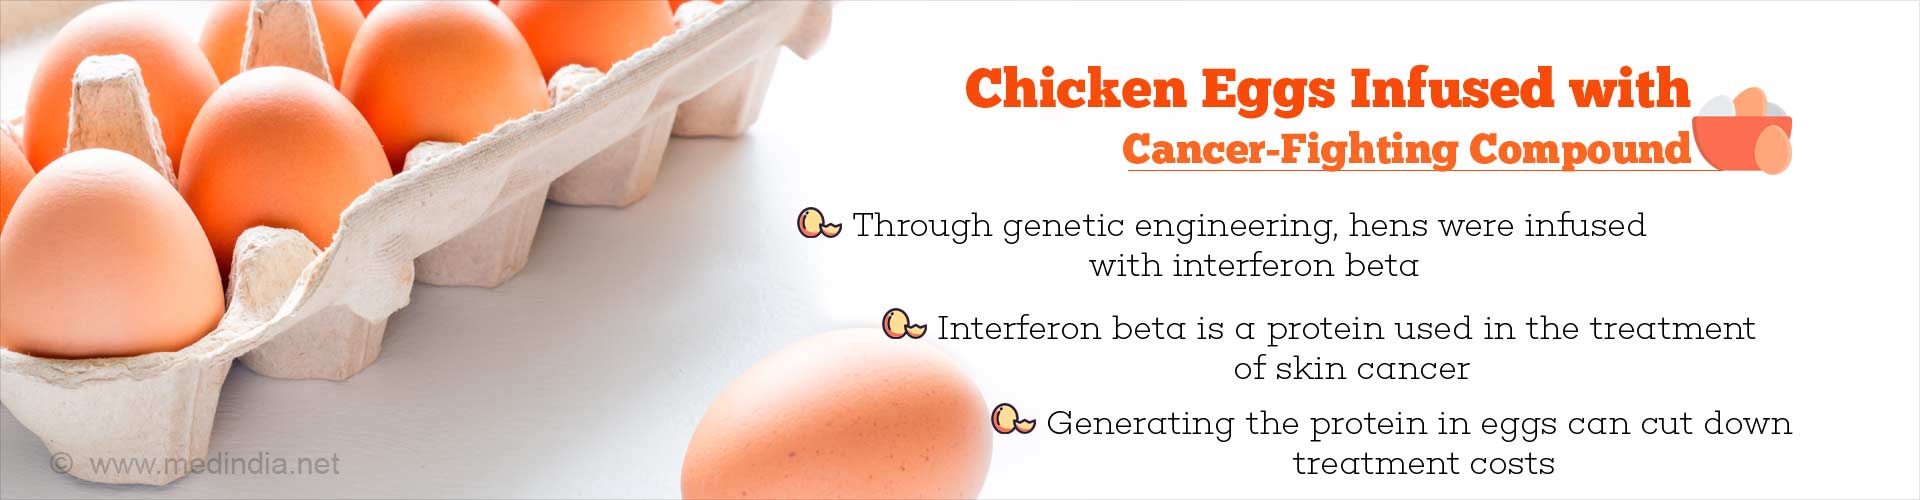 Chicken eggs infused with cancer-fighting compound
- Through genetic engineering, hens wee infused with interferon beta
- Interferon beta is a protein used in the treatment of skin cancer
- Generating the protein in eggs can cut down treatment costs